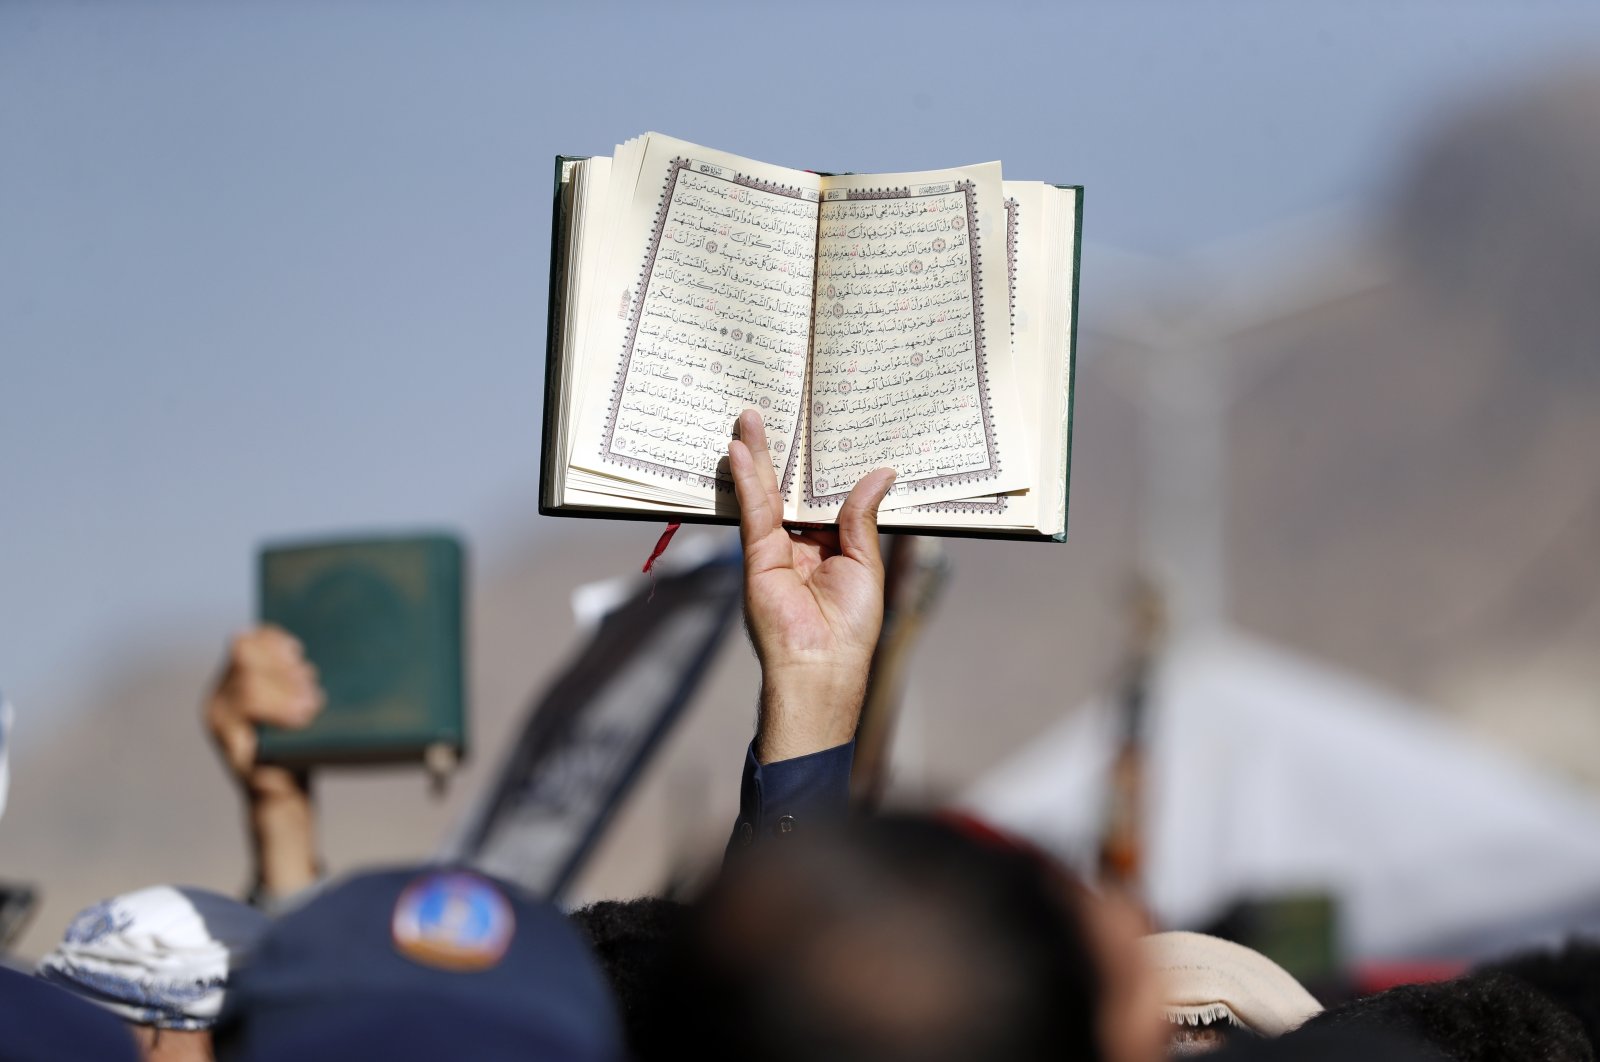 A Yemeni holds up a copy of the Quran during a protest against the burning of the holy book by a Swedish politician, in Sanaa, Yemen, Jan. 23, 2023. (EPA Photo)